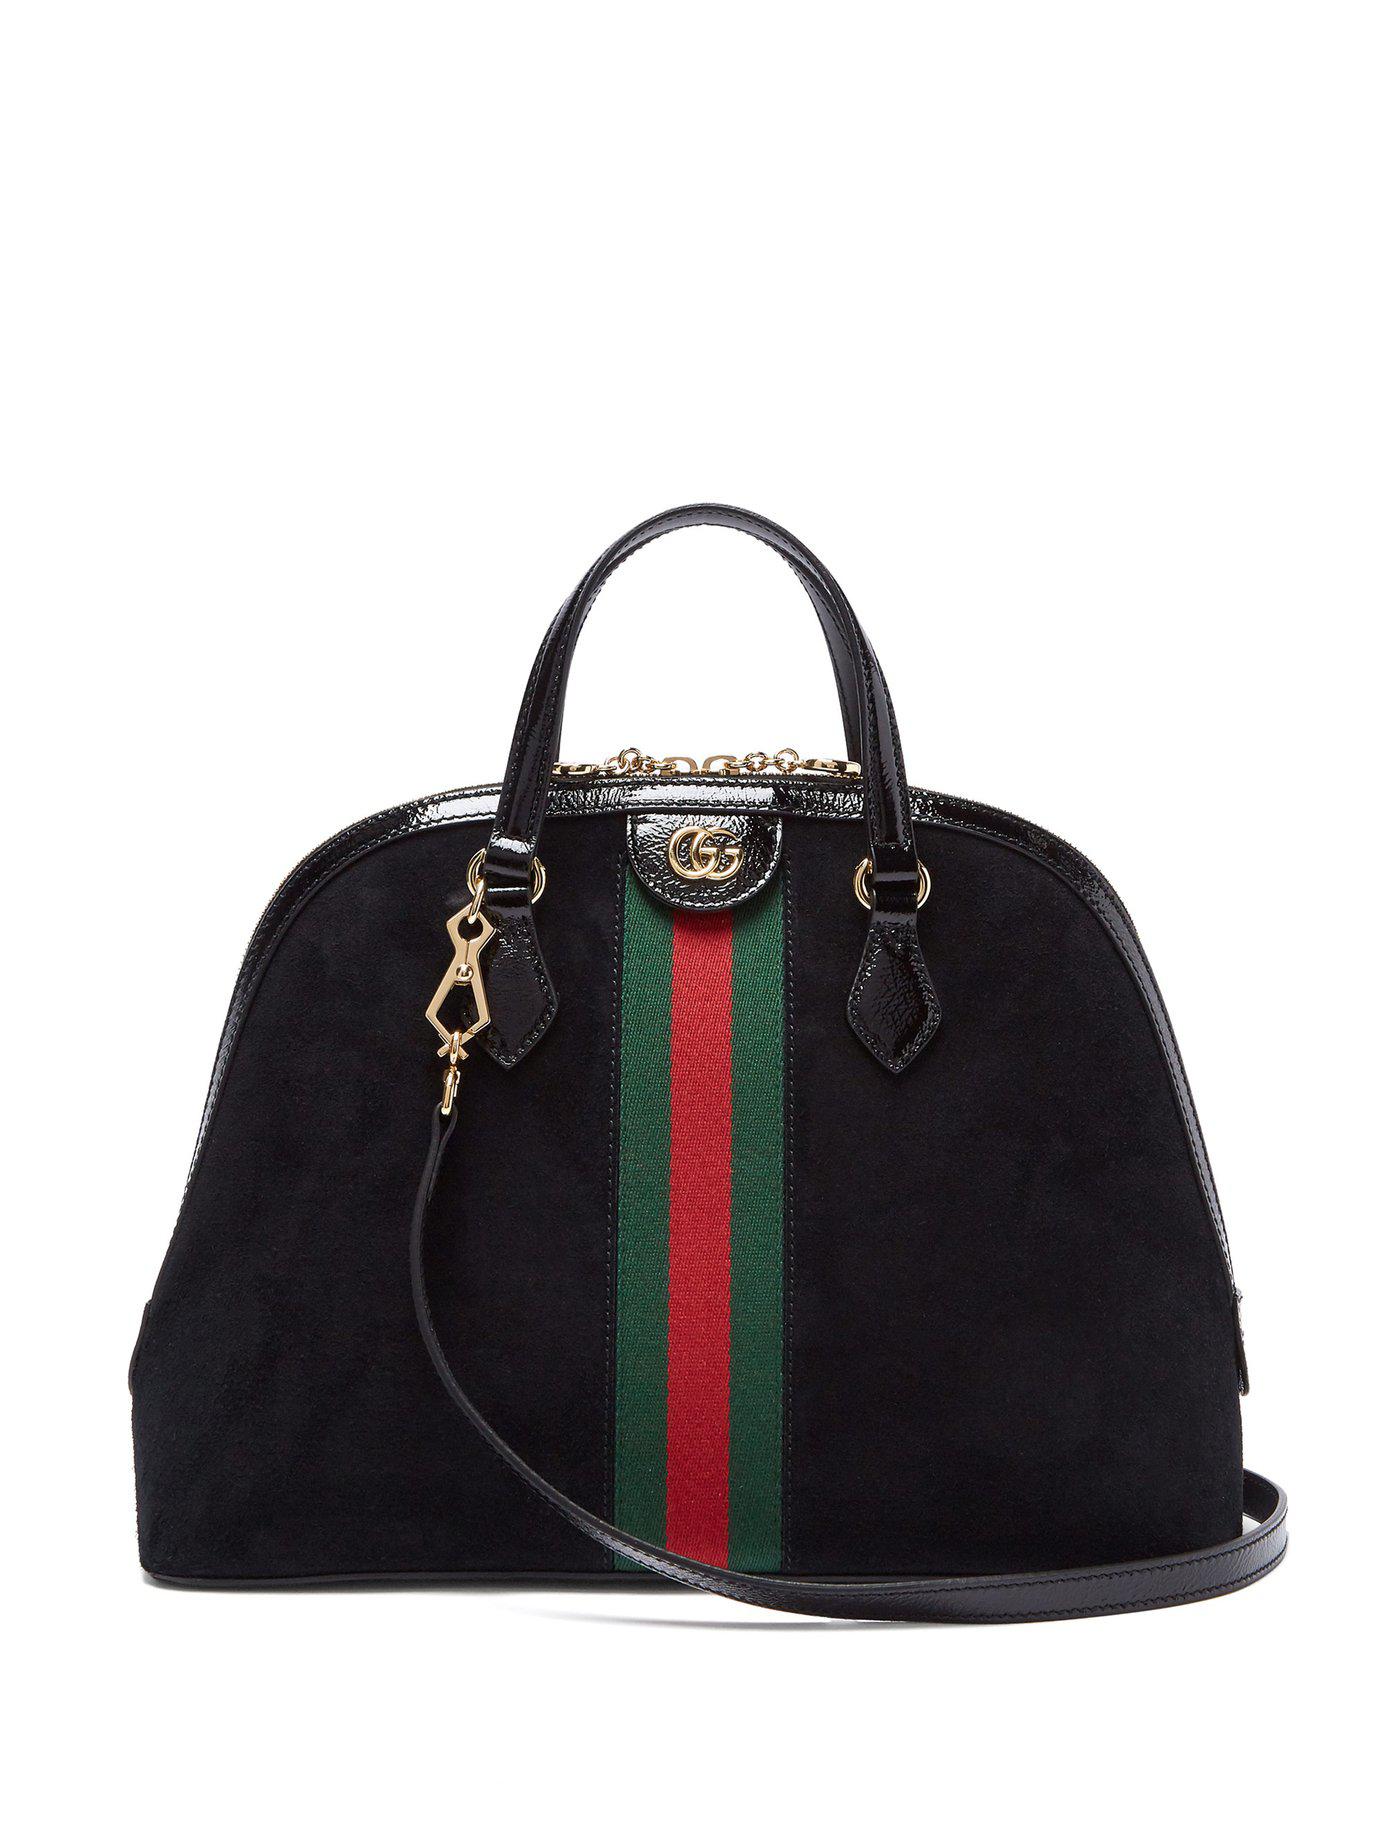 GUCCI Suede Patent GG Web Small Ophidia Tote Bag Black 1257705